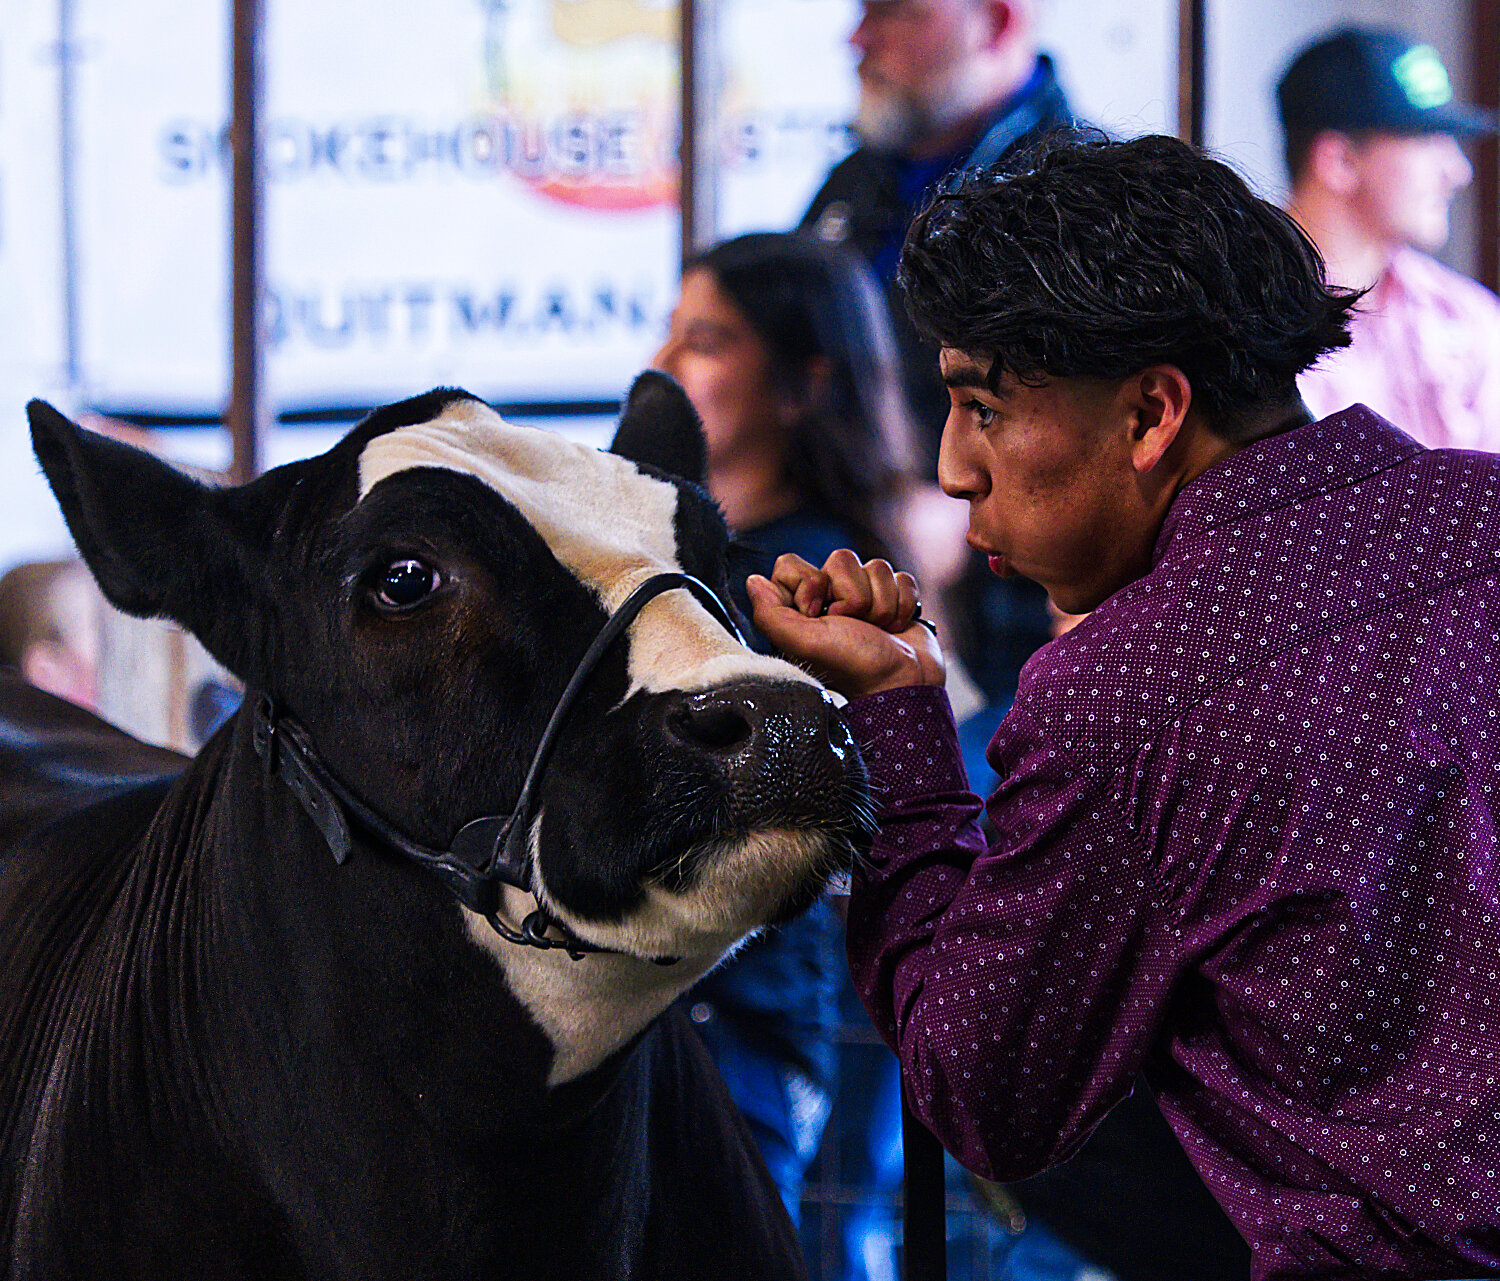 Mineola's Fernel Ventura of Wood County 4-H shows his grand champion market steer, which drew a bid of $10,500 to start the auction. [see some more sale images]